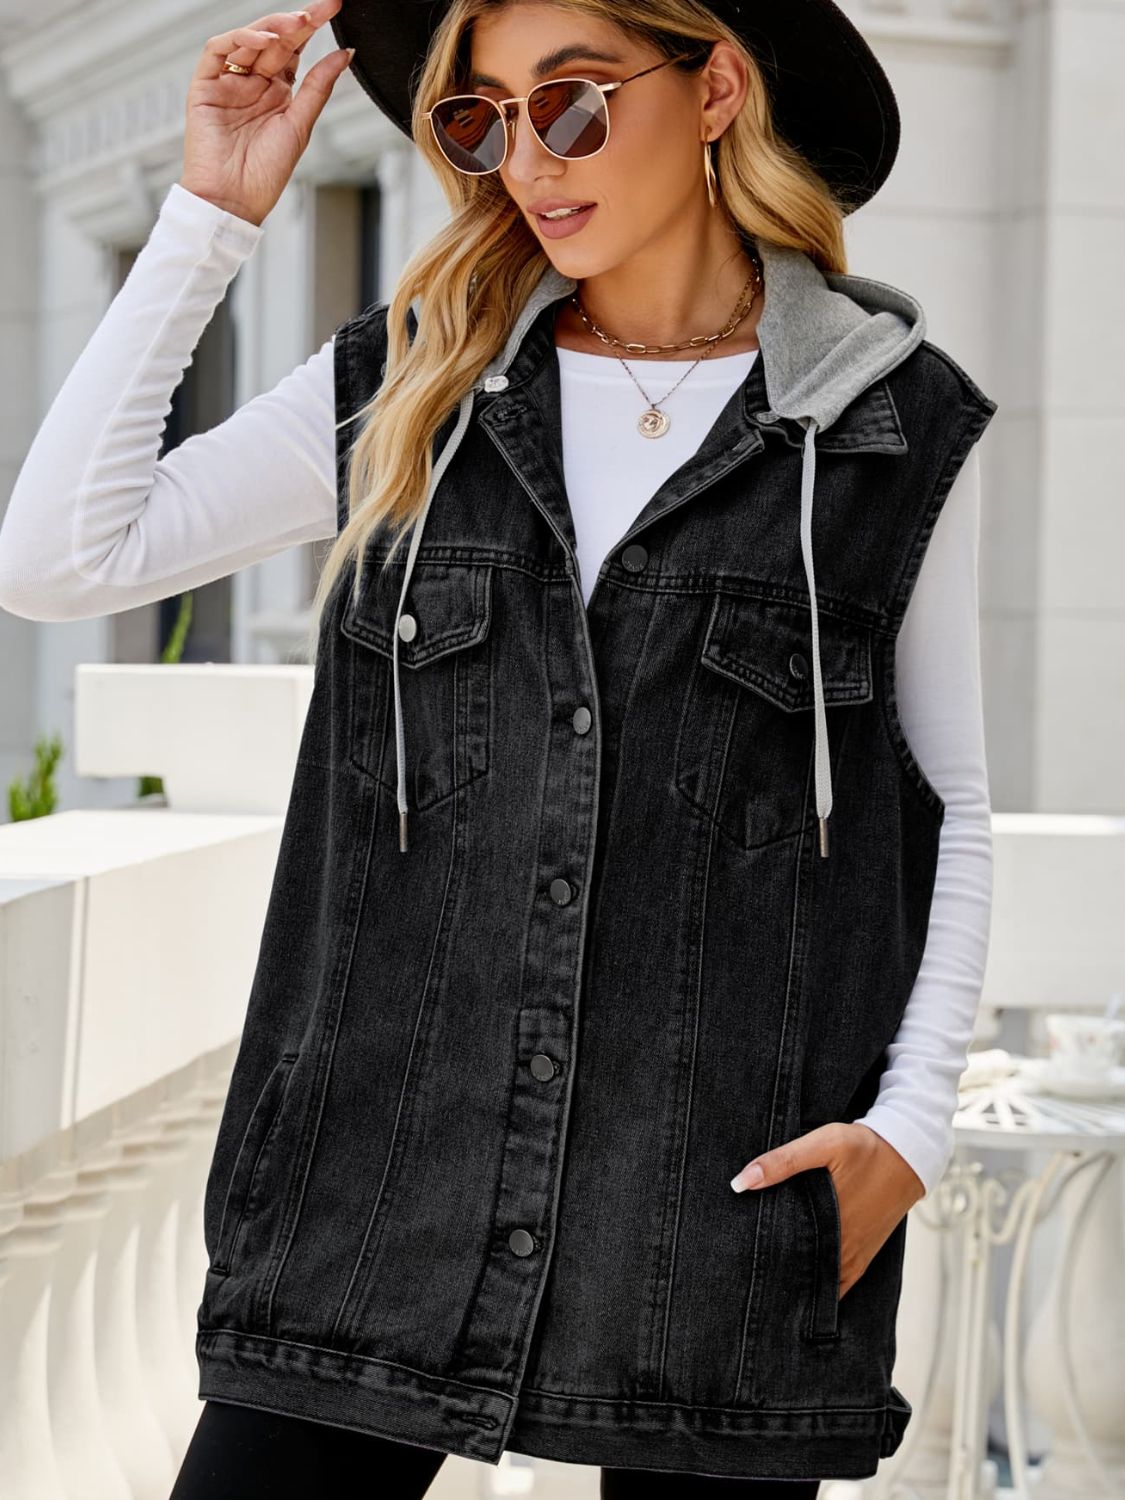 Black Drawstring Hooded Sleeveless Denim Top with Pockets Sentient Beauty Fashions Apparel & Accessories